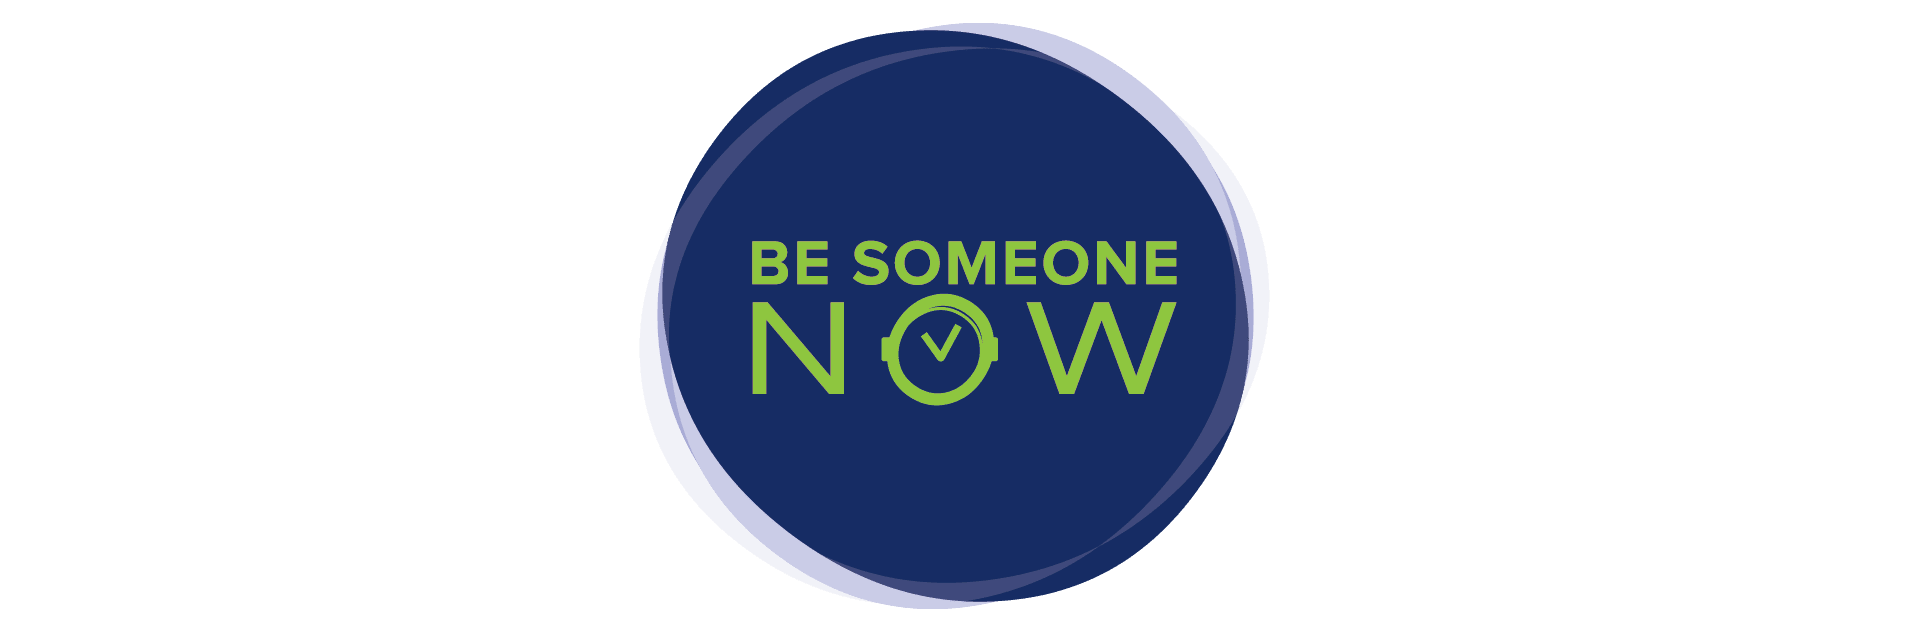 Be-Someone-Now-Scan-Inc-Navy-And-Green-BSON-Circle-Logo